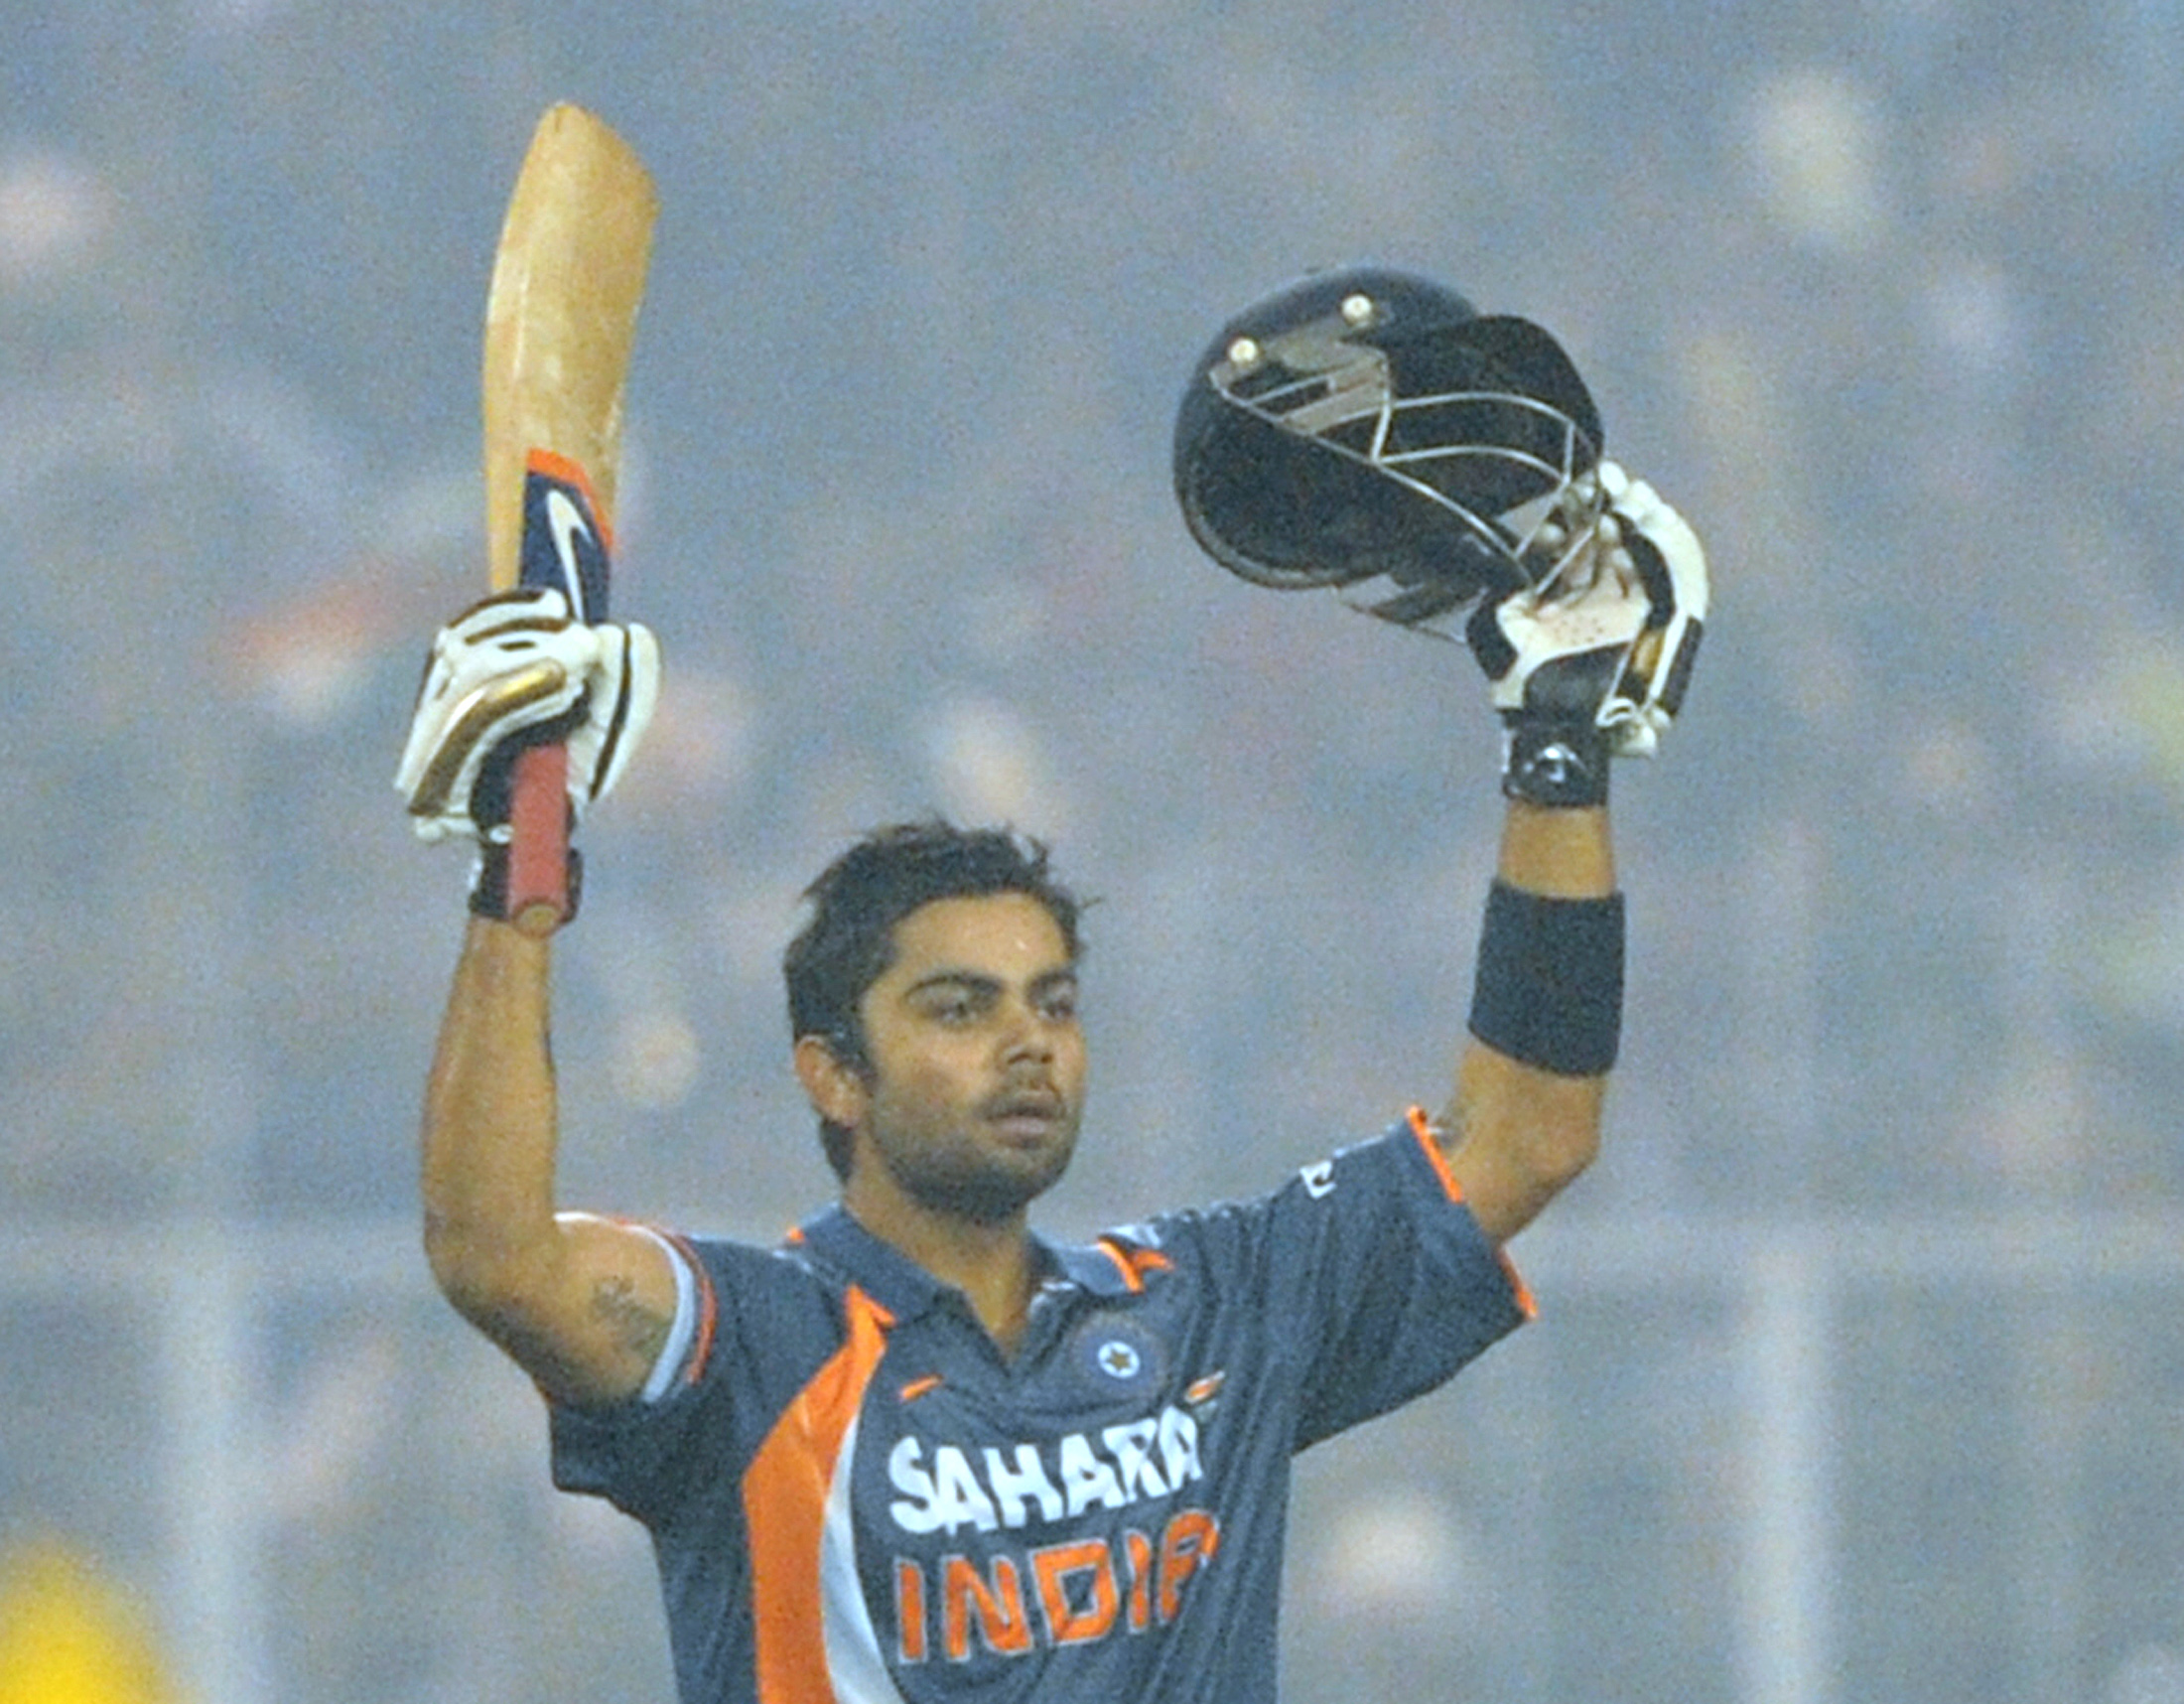 Cricbuzz on Twitter: "ON THIS DAY, 2009: Virat Kohli got the first of his  43 ODI hundreds. Here's a look back at his incredible journey. Thread by  @deeputalks #ViratKohli43 #Thread https://t.co/VNQUsUyd0f" /